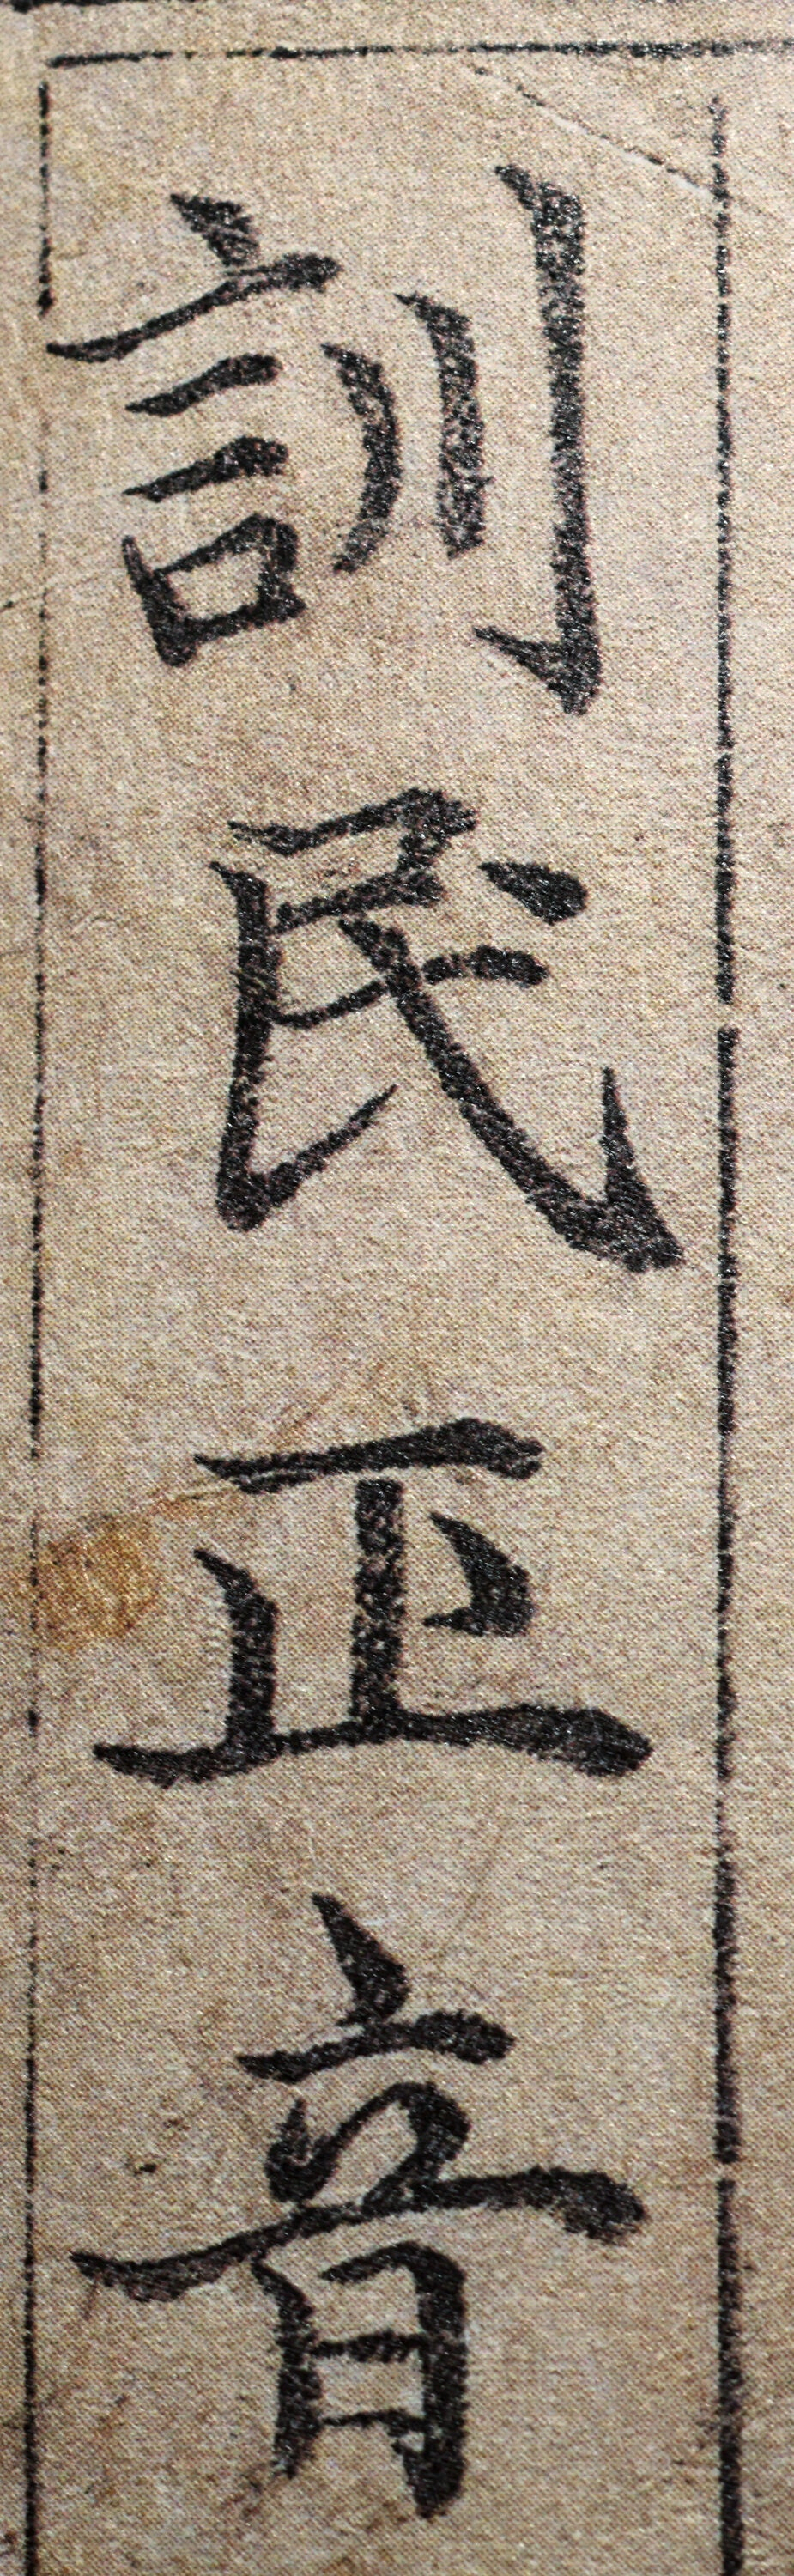 Hunminjeongeum, the title of the book introducing the new writing system and also initially the name of the new script, written in Hanja. Photo taken from a replica of the Hunminjeongeum Haeryebon, the original study guide.